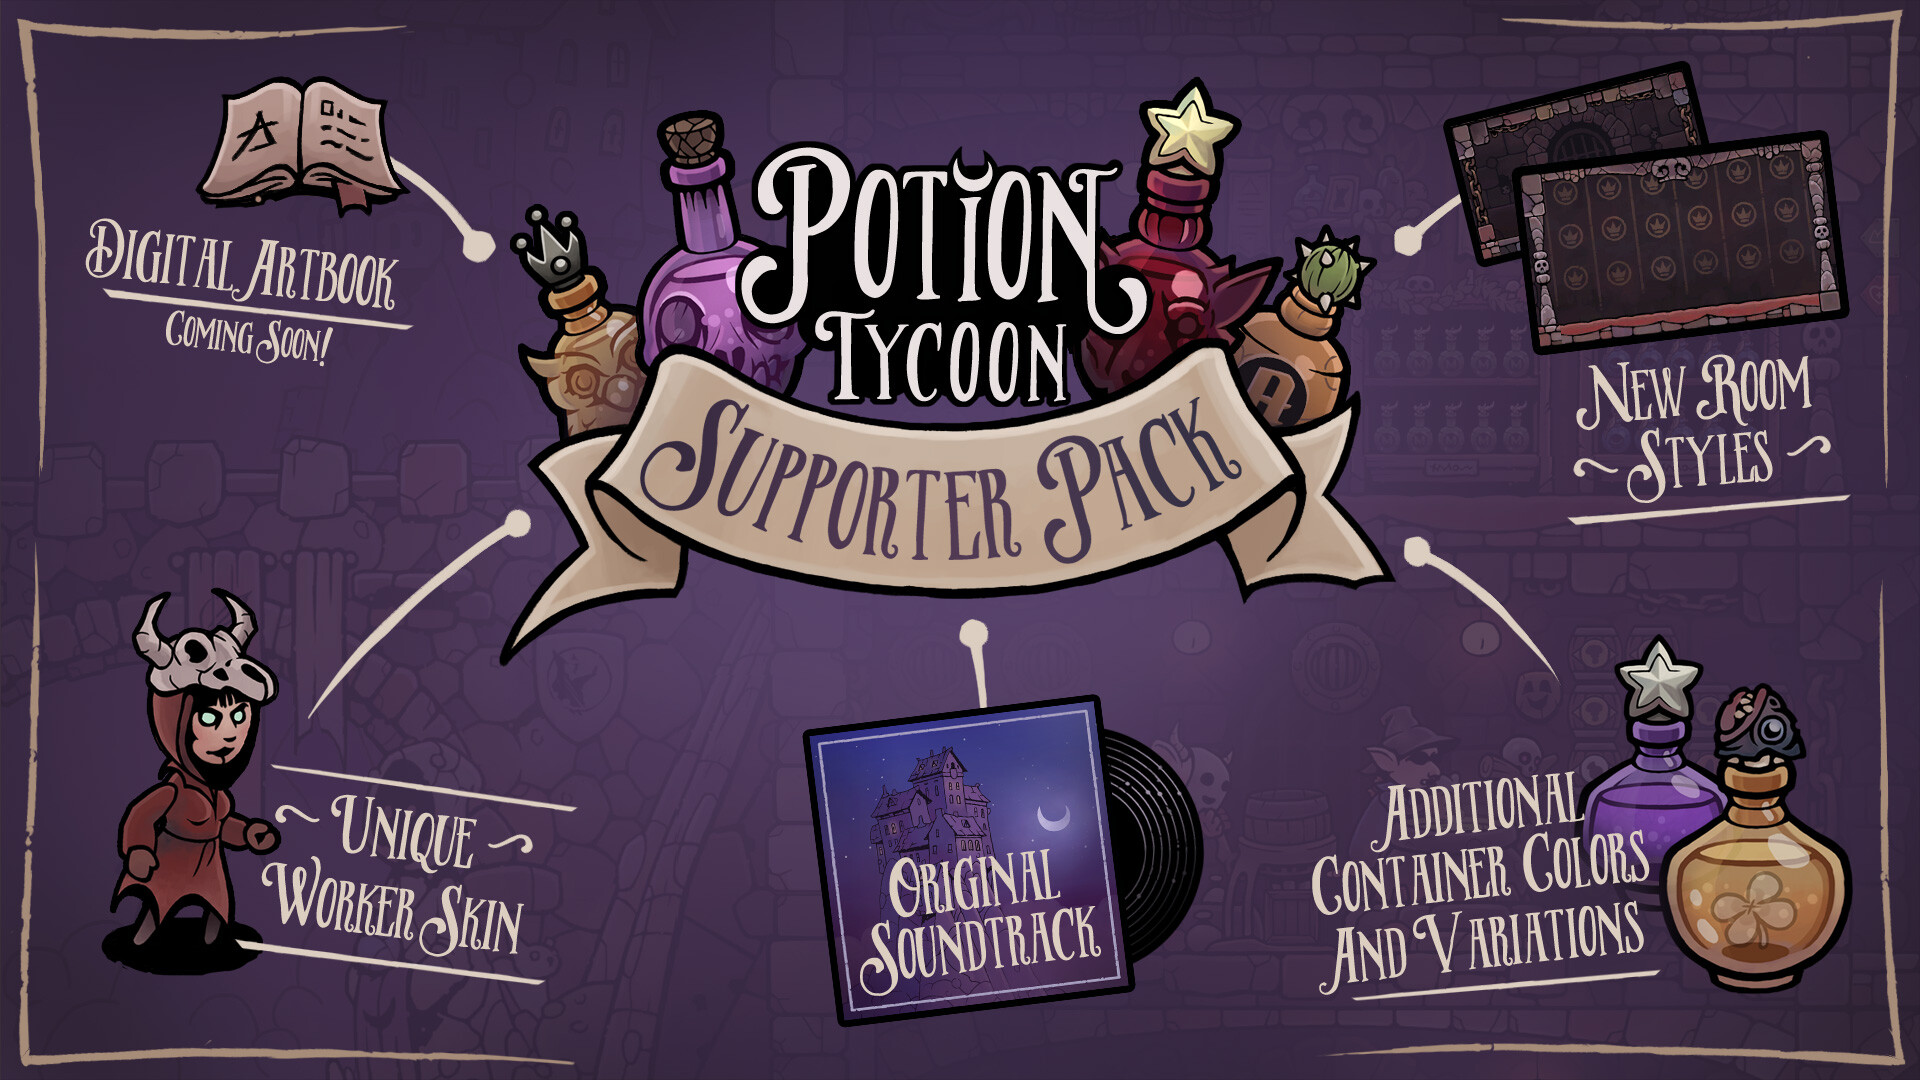 Potion Tycoon - Supporter Pack DLC Steam CD Key, $7.88